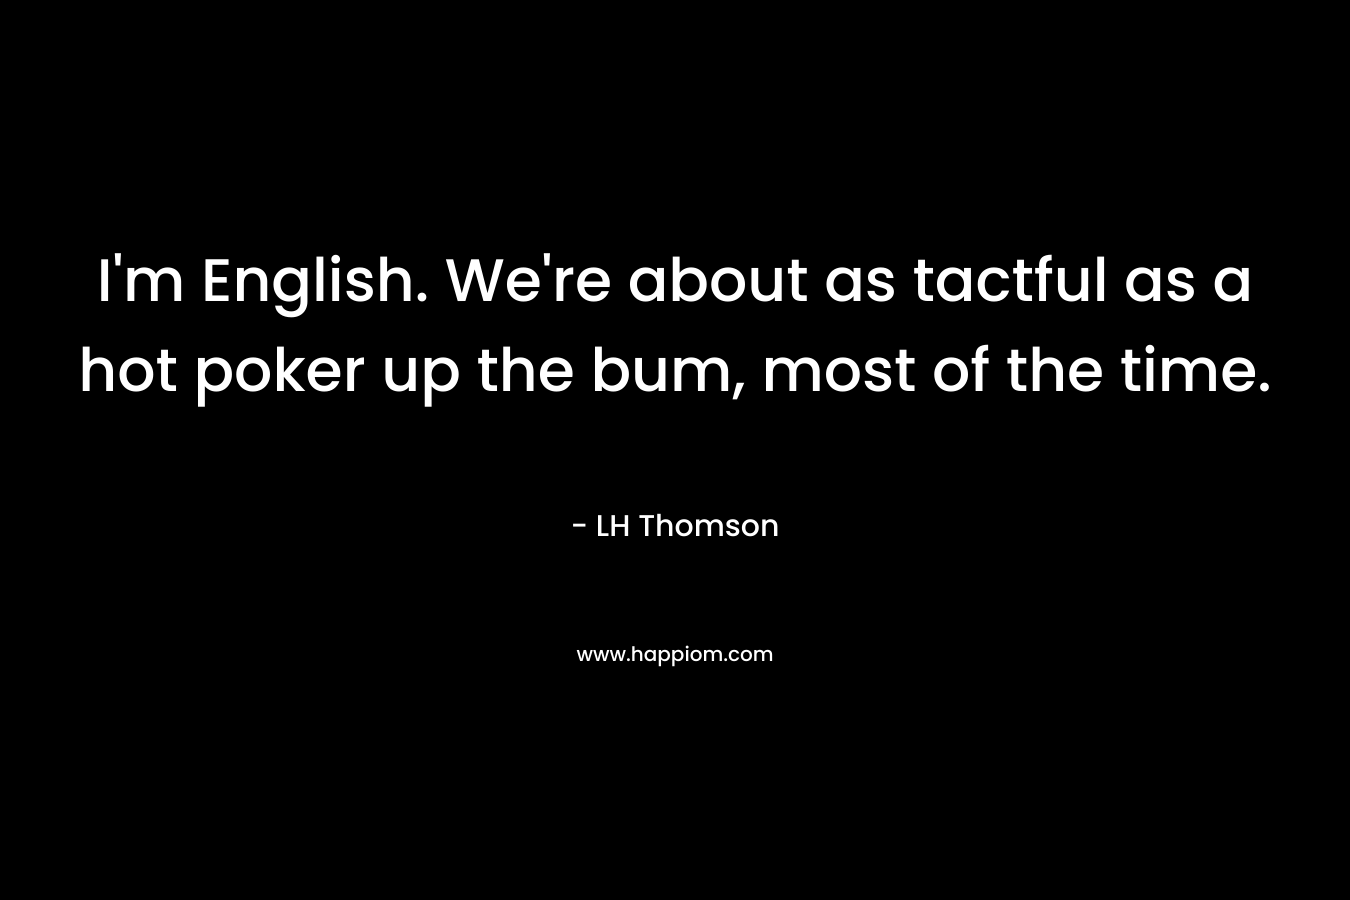 I'm English. We're about as tactful as a hot poker up the bum, most of the time.